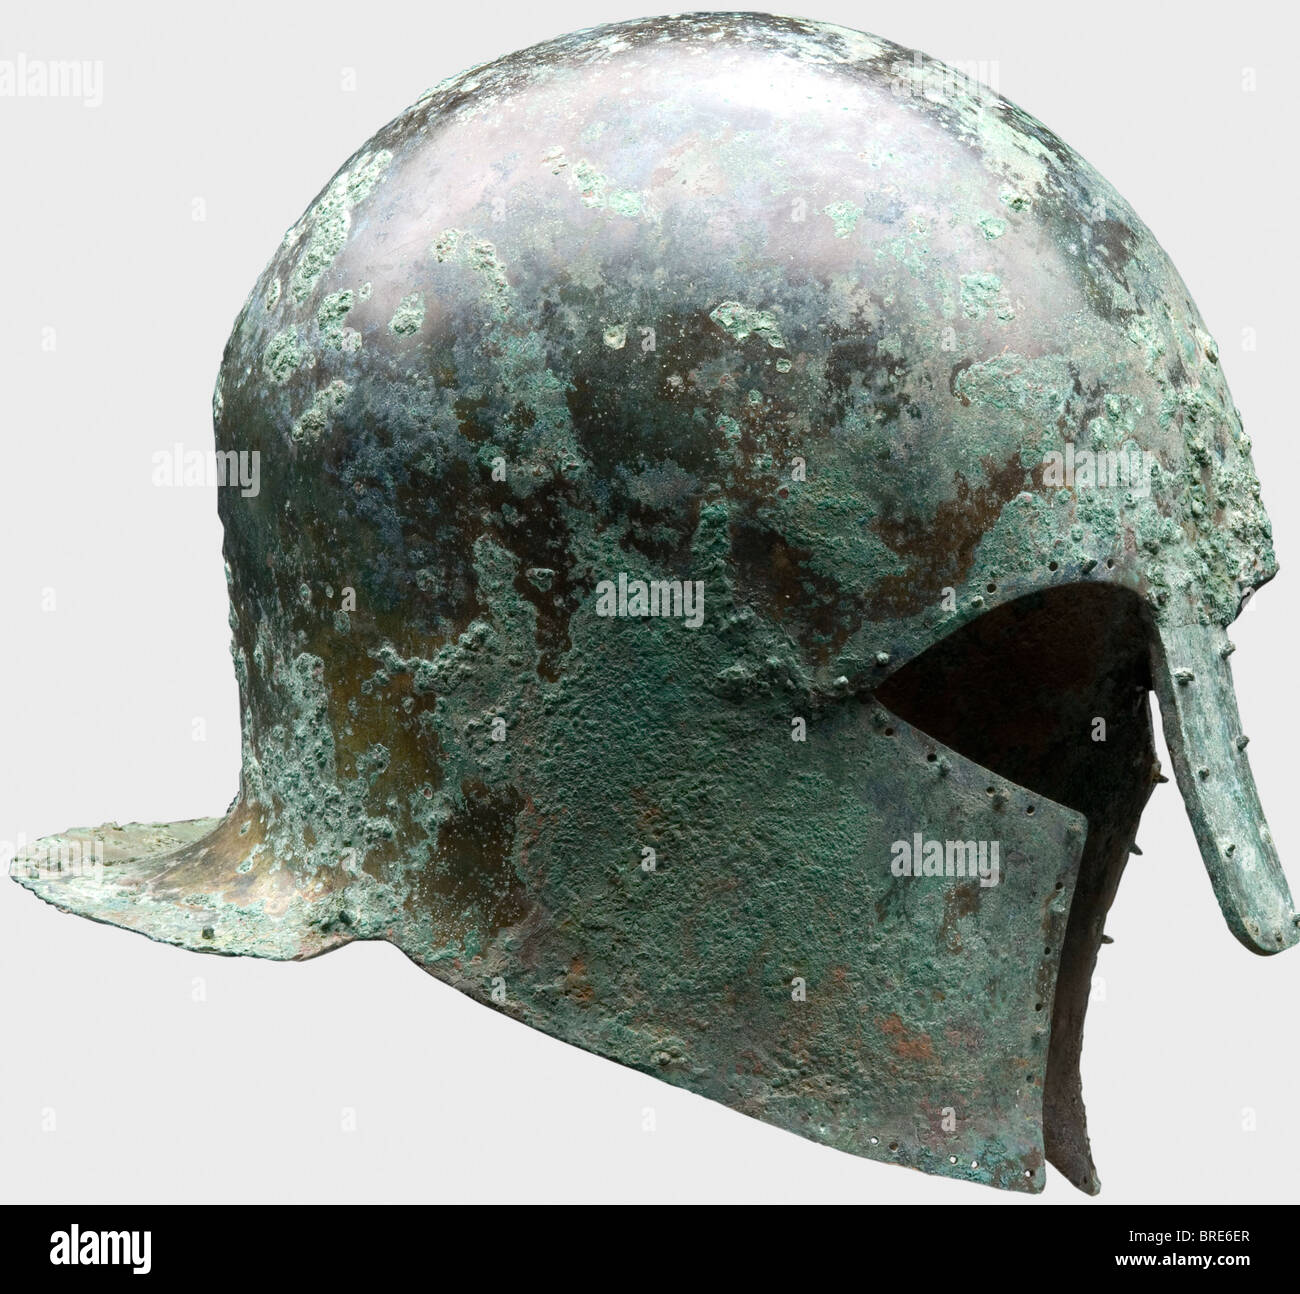 A Corinthian helmet, 7th/6th century B.C. Thick-walled, heavy, bronze Corinthian helmet with a tall skull and extended neck-guard. Large eye cutouts, slightly concave cheekpieces and a sturdy riveted long nose-guard bent outwards. Surrounded with drilled holes, some in pairs, and some still retaining the decorative or lining rivets with round heads. Height 22.1 cm. Weight 1288 g. Metal surfaces with light-brown, dark and light-green patina. Dirt residue inside. Isolated corrosion pits on the surface. Very good metal retention. Axel Guttmann Collection (H 147/ A, Stock Photo